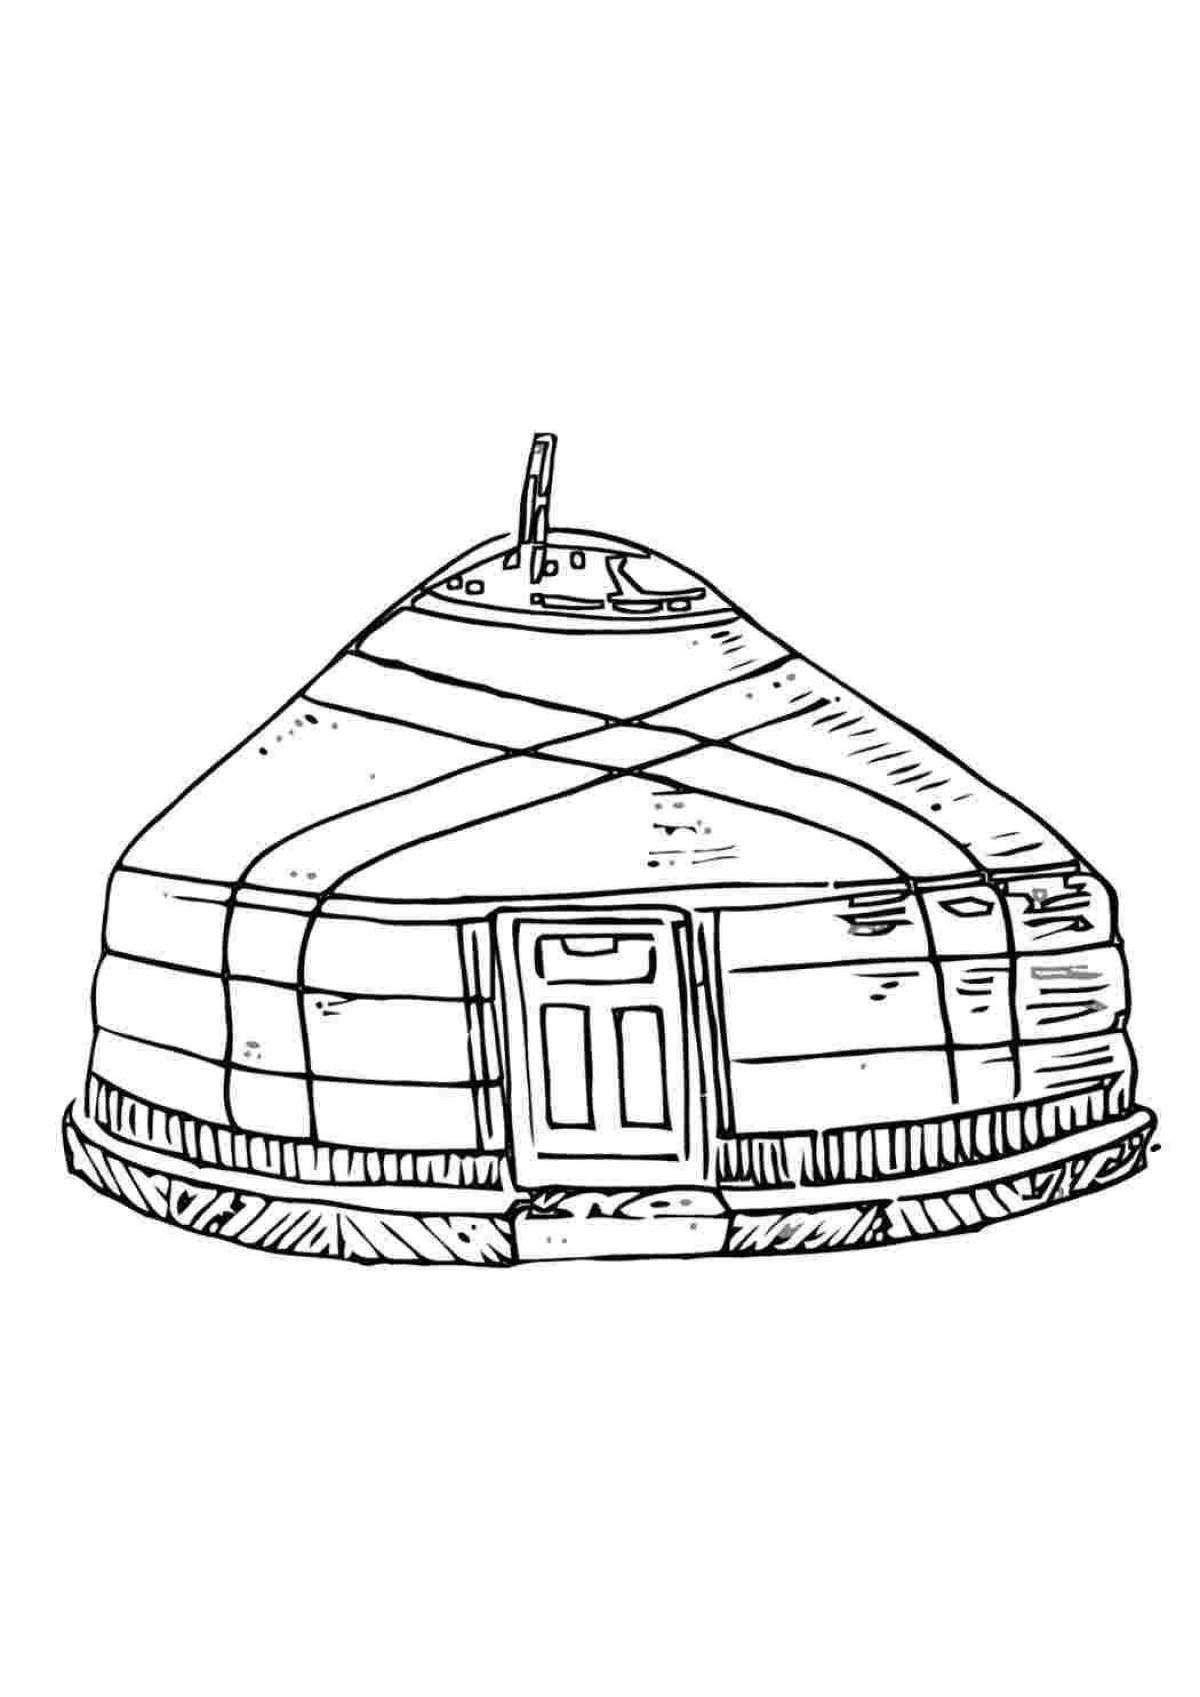 Fancy yurt coloring page